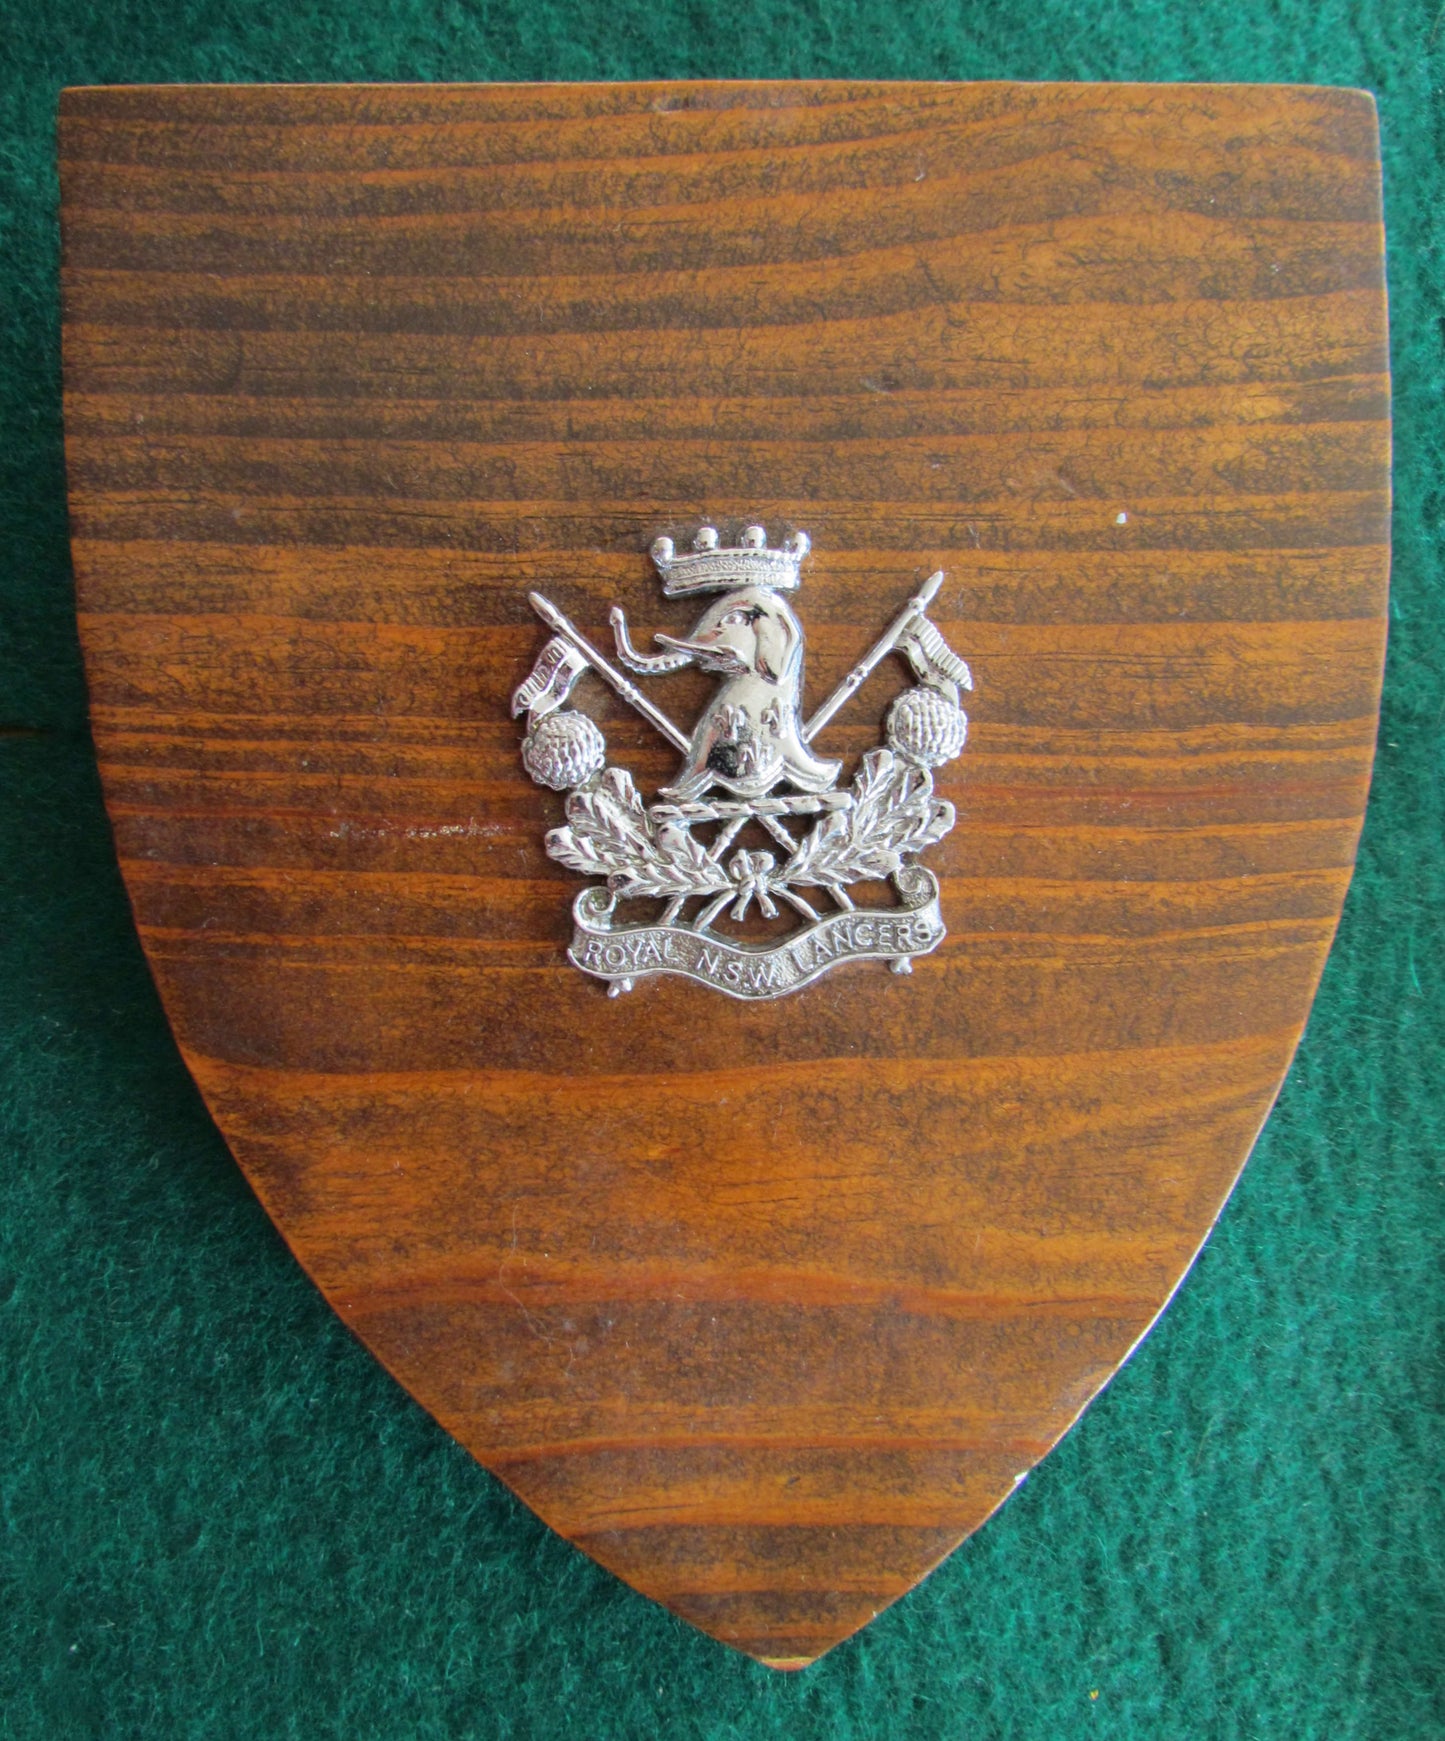 Royal NSW Lancers Wall Plaque